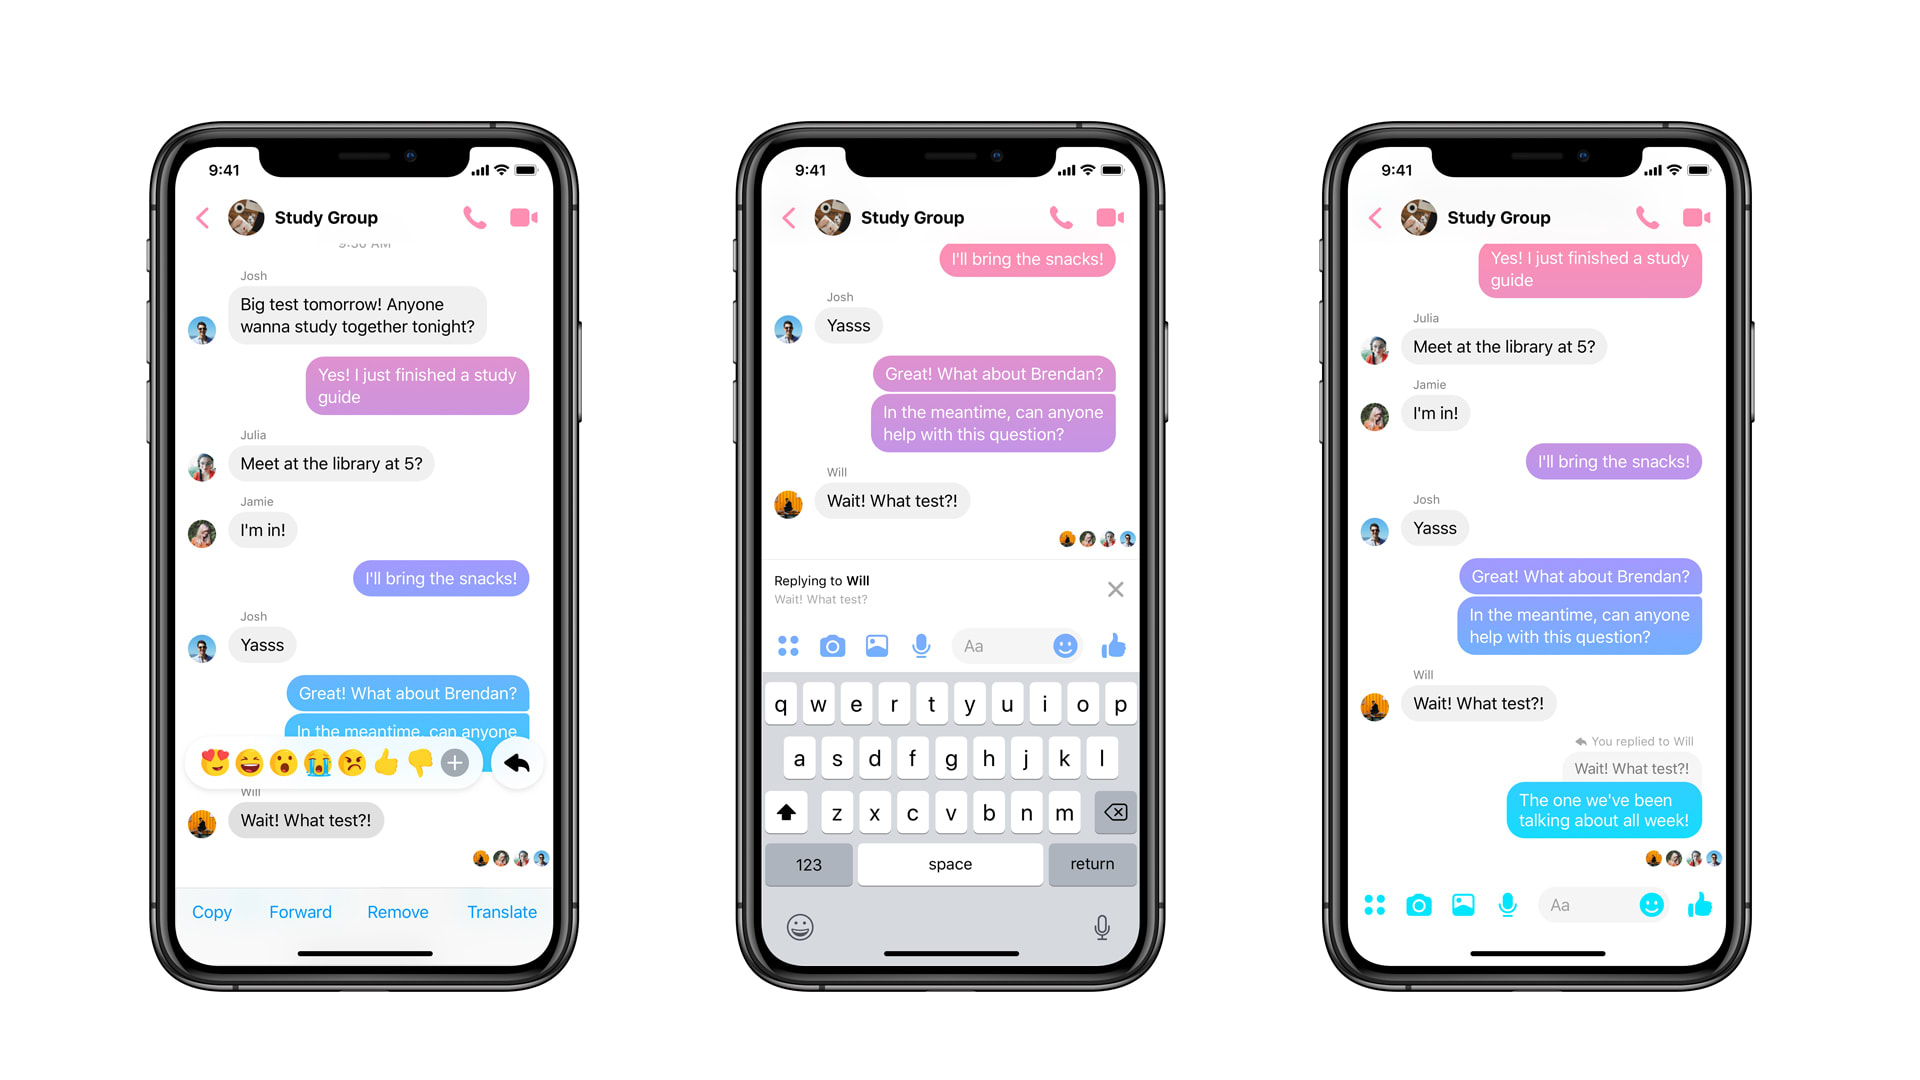 Facebook adds quoted message replies to Messenger